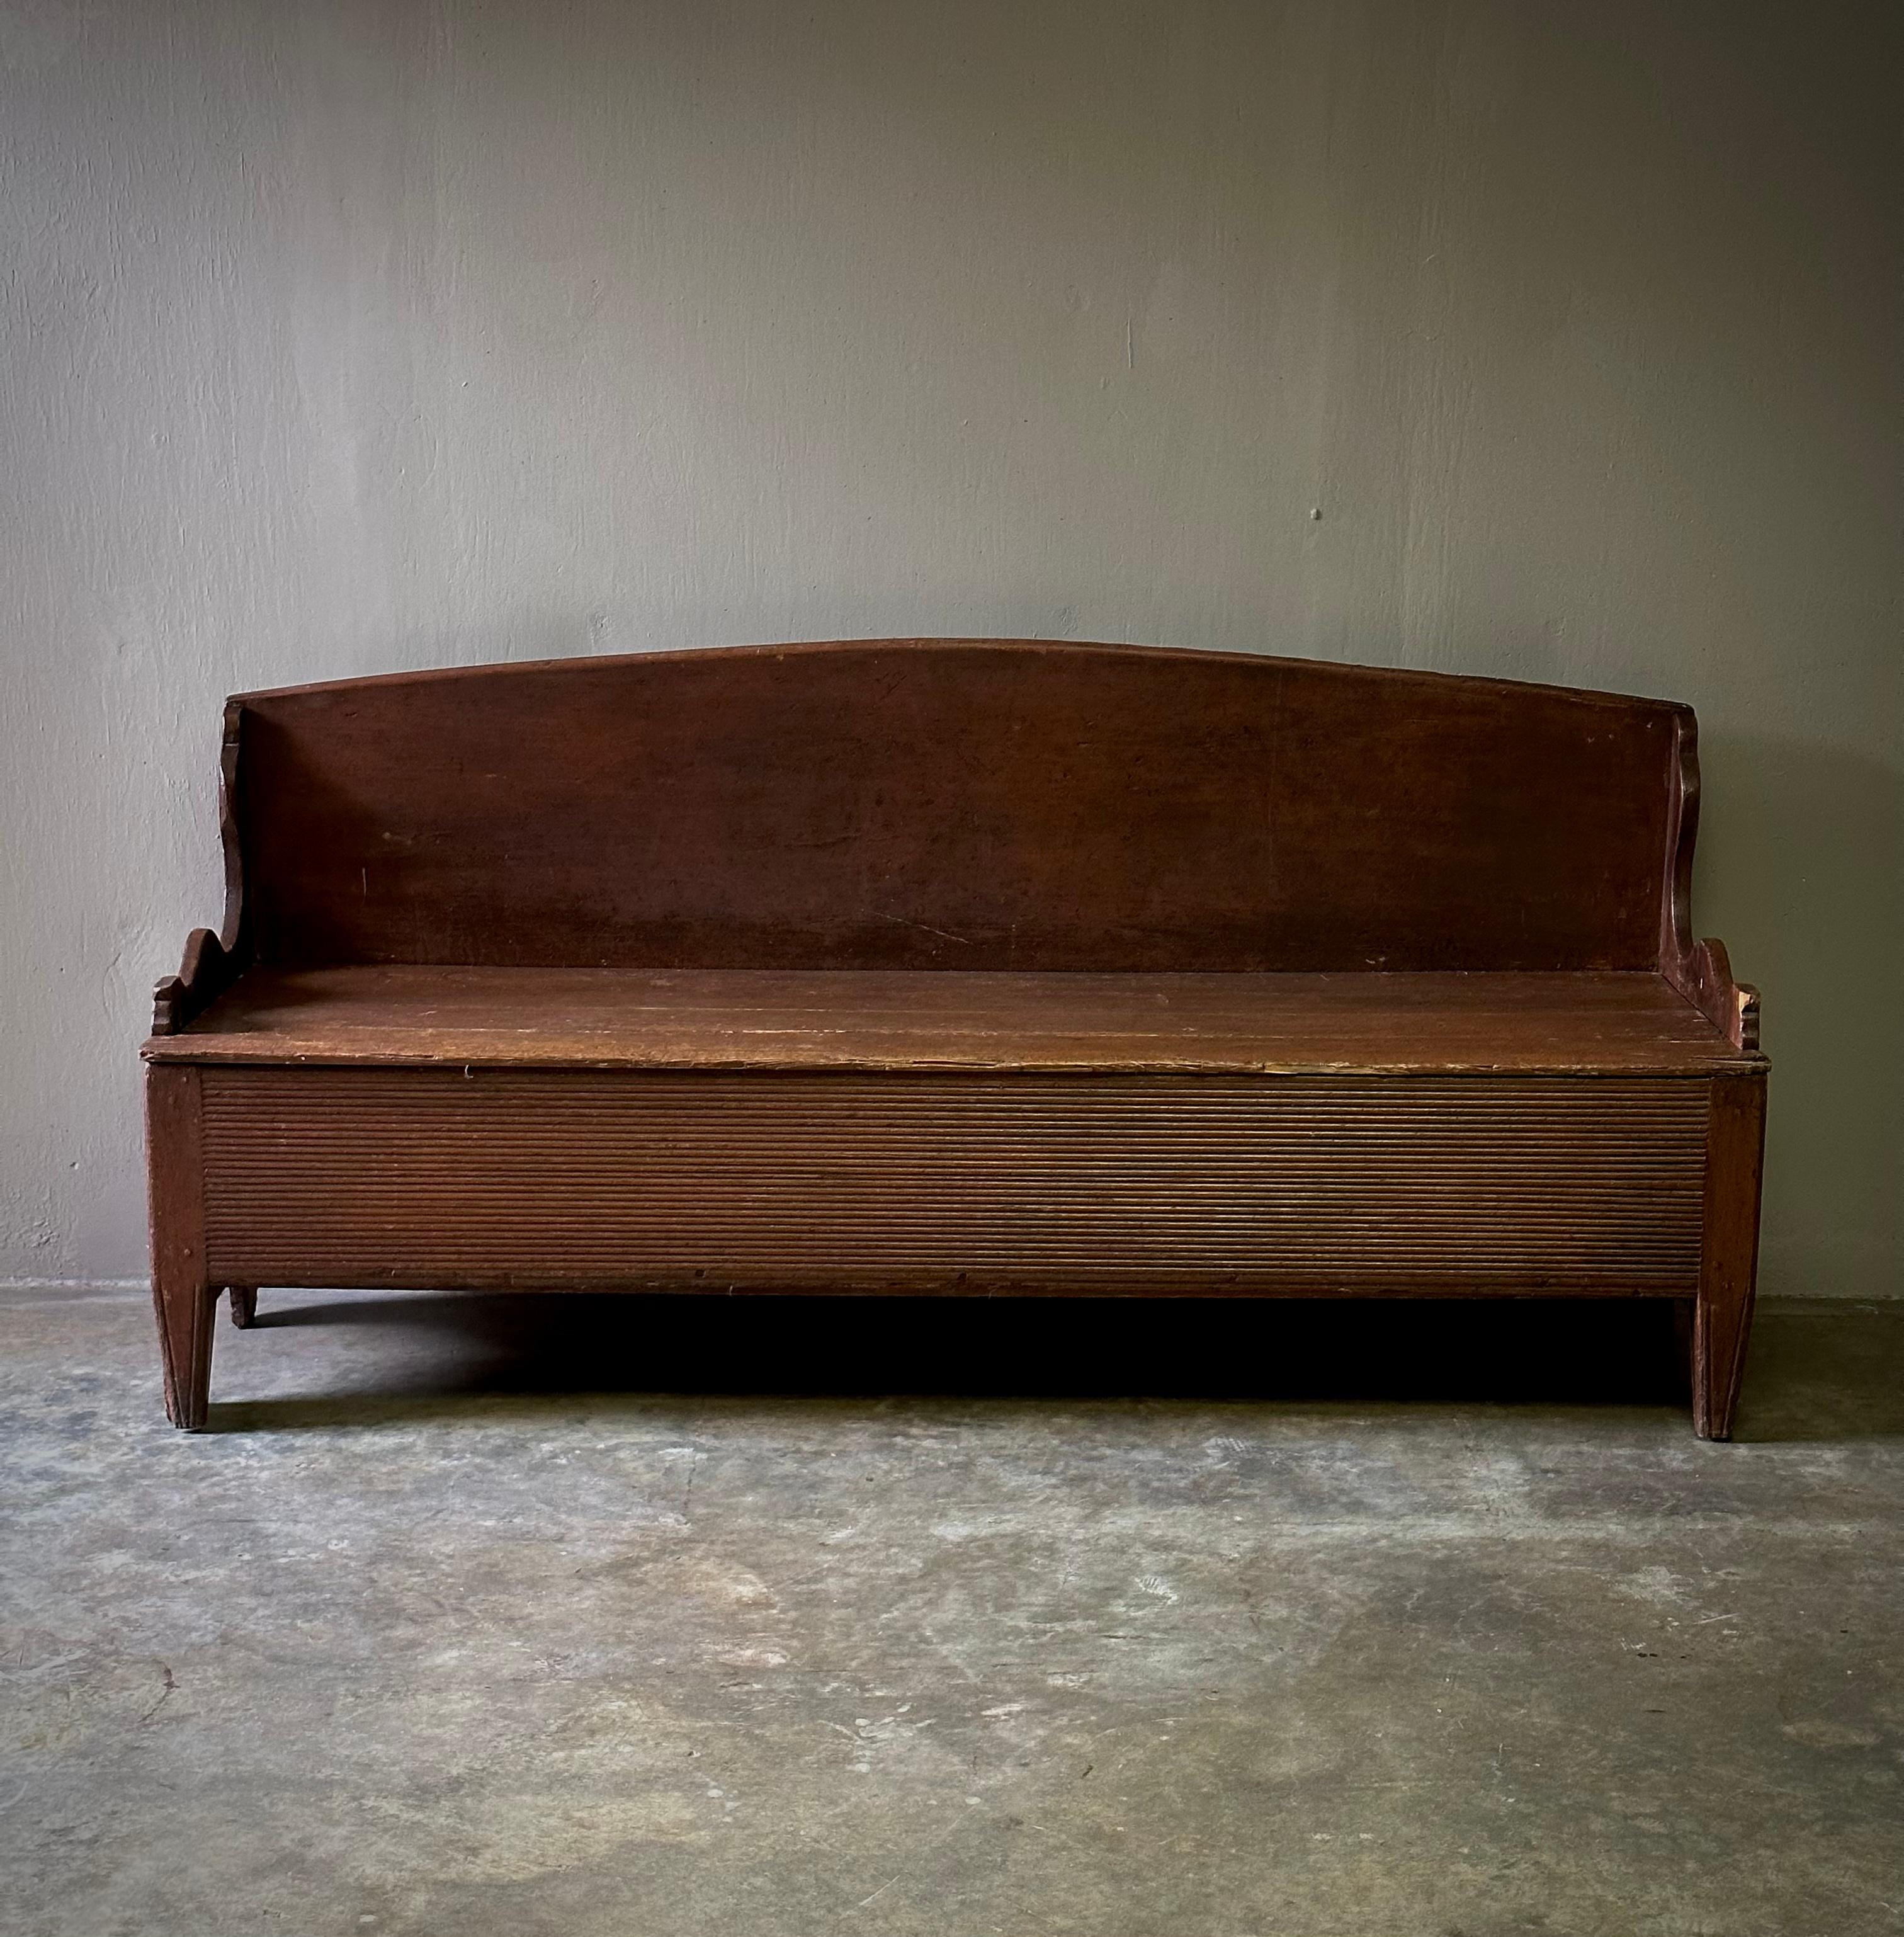 Rustic 19th century Swedish wooden hallway or patio bench. Humble yet capacious with a straight back, deep-set seat, ribbed accenting and hand carved armrests. Rustic simplicity at its best. 

Sweden, circa 1860

Dimensions: 72W x 21Dx 34.5H x